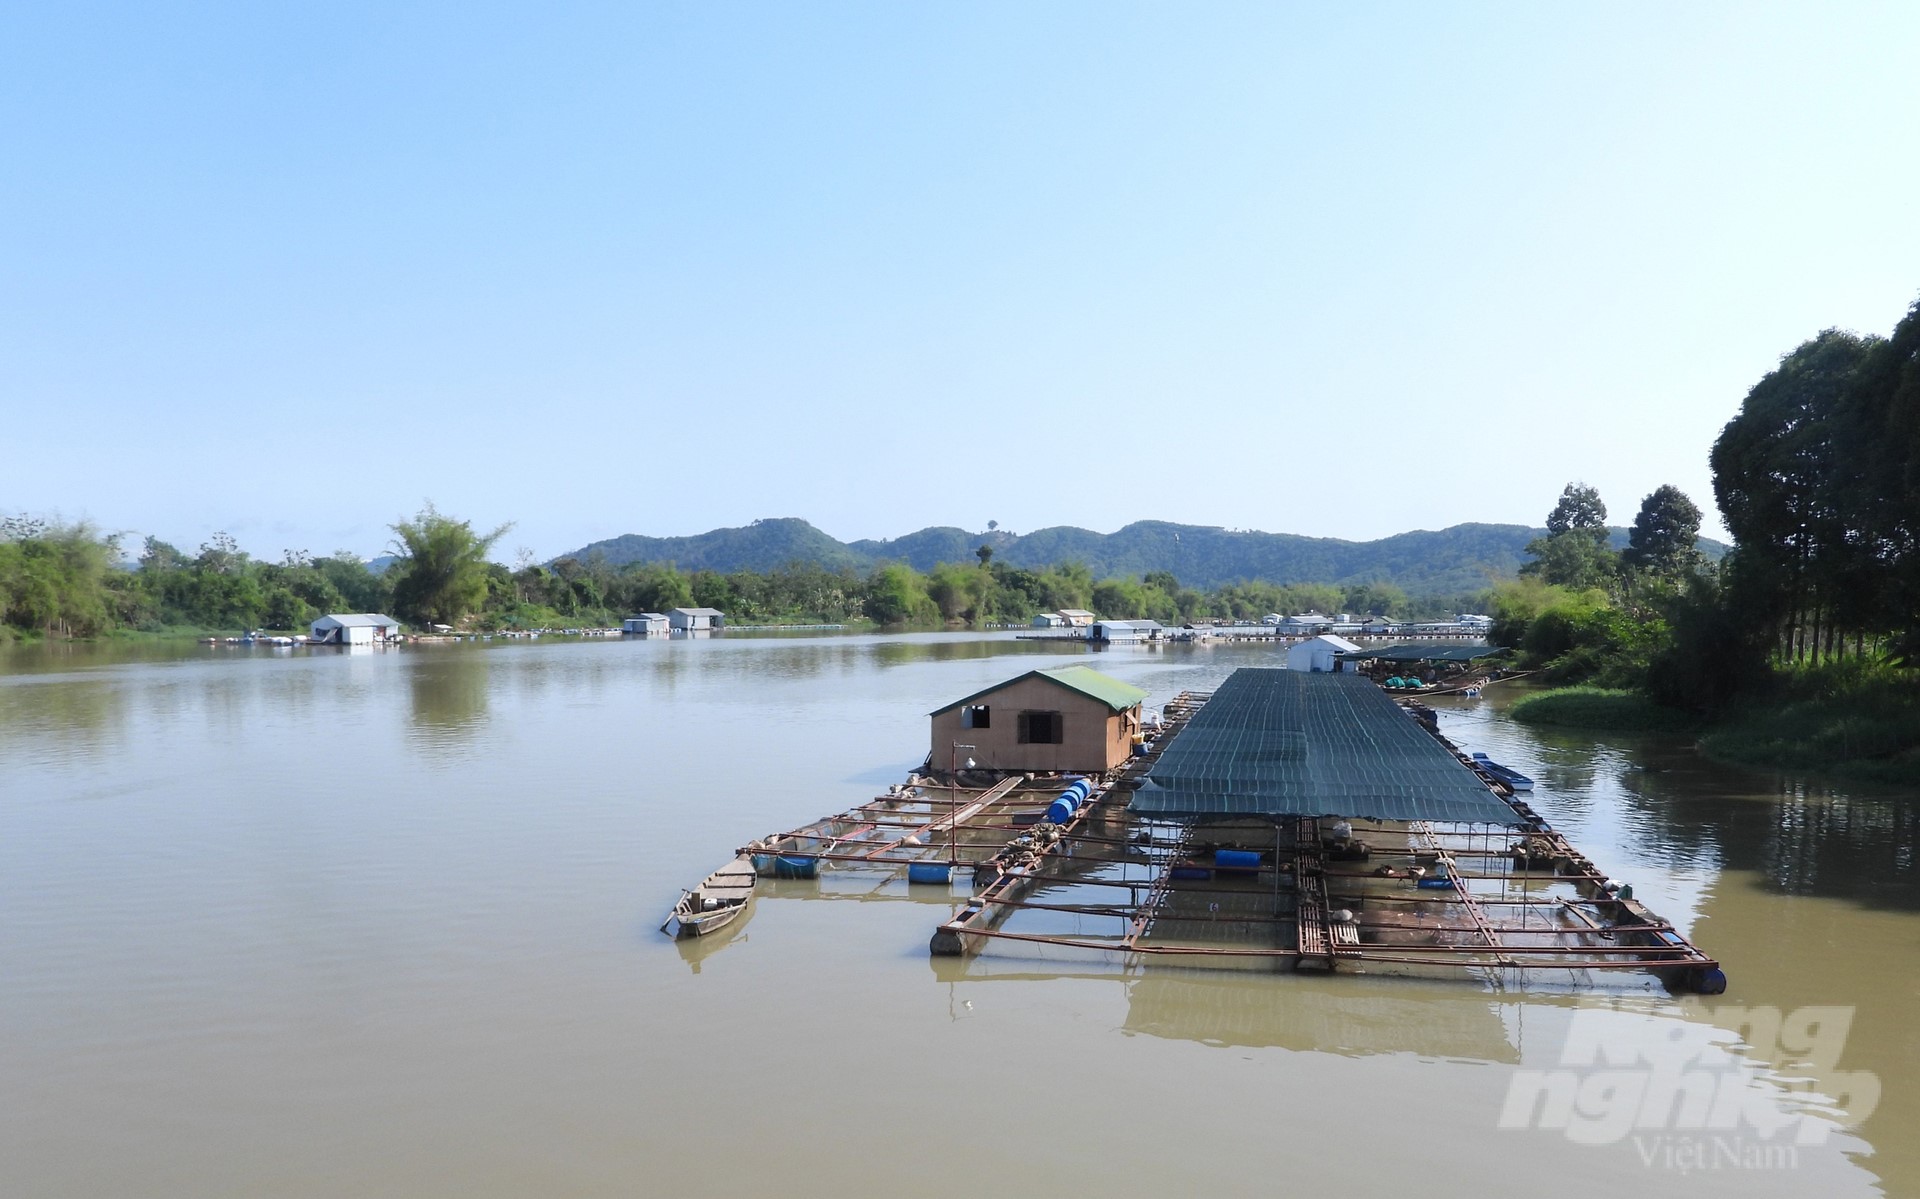 According to the climate change scenario for 2020, for Ba Ria-Vung Tau province, if the sea level rises by 100cm, about 4.84% of the province's area is at risk of being flooded.